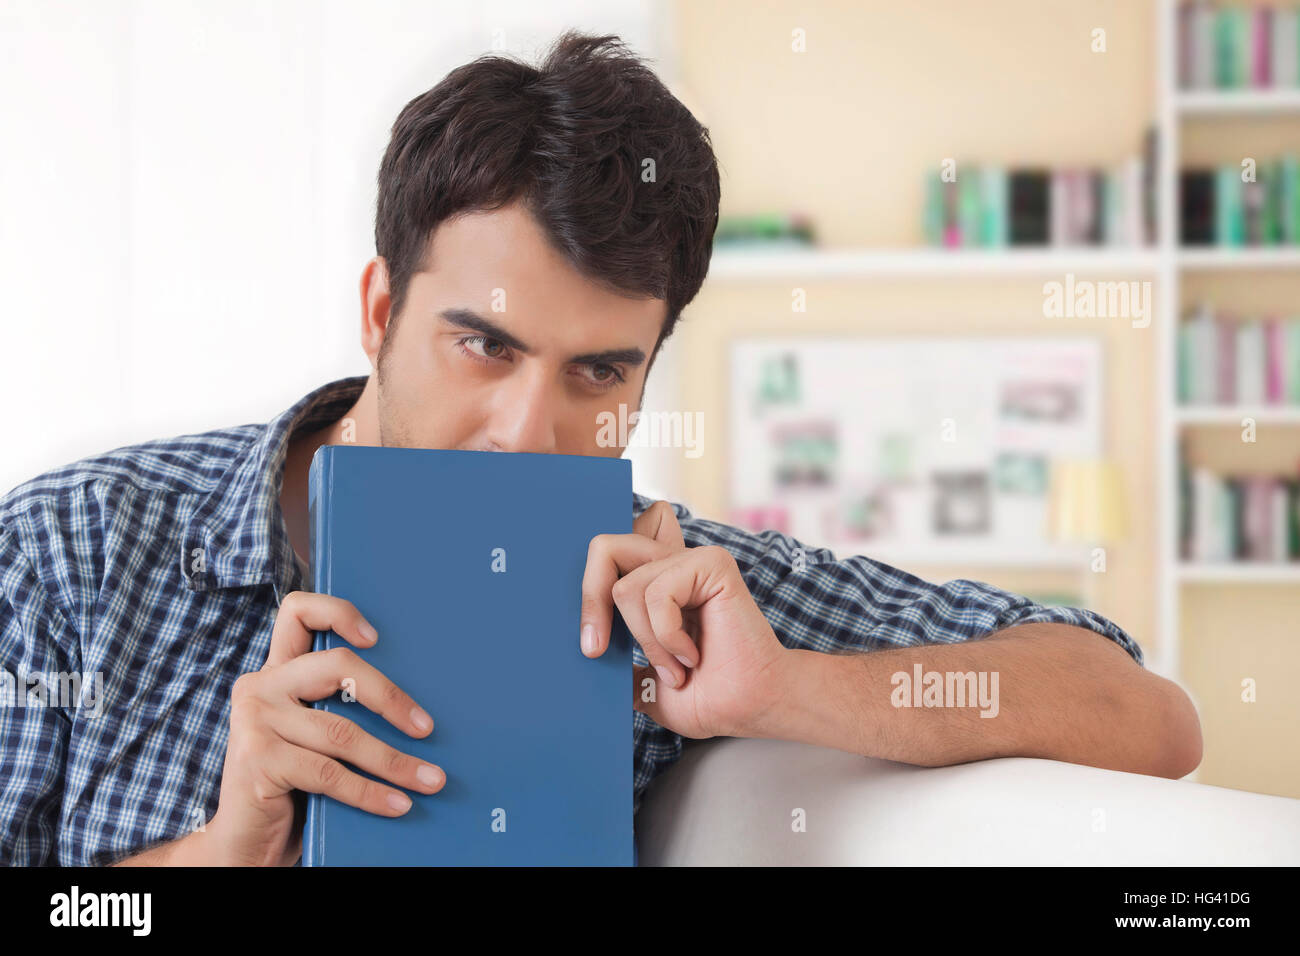 Young man holding book and looking away Stock Photo